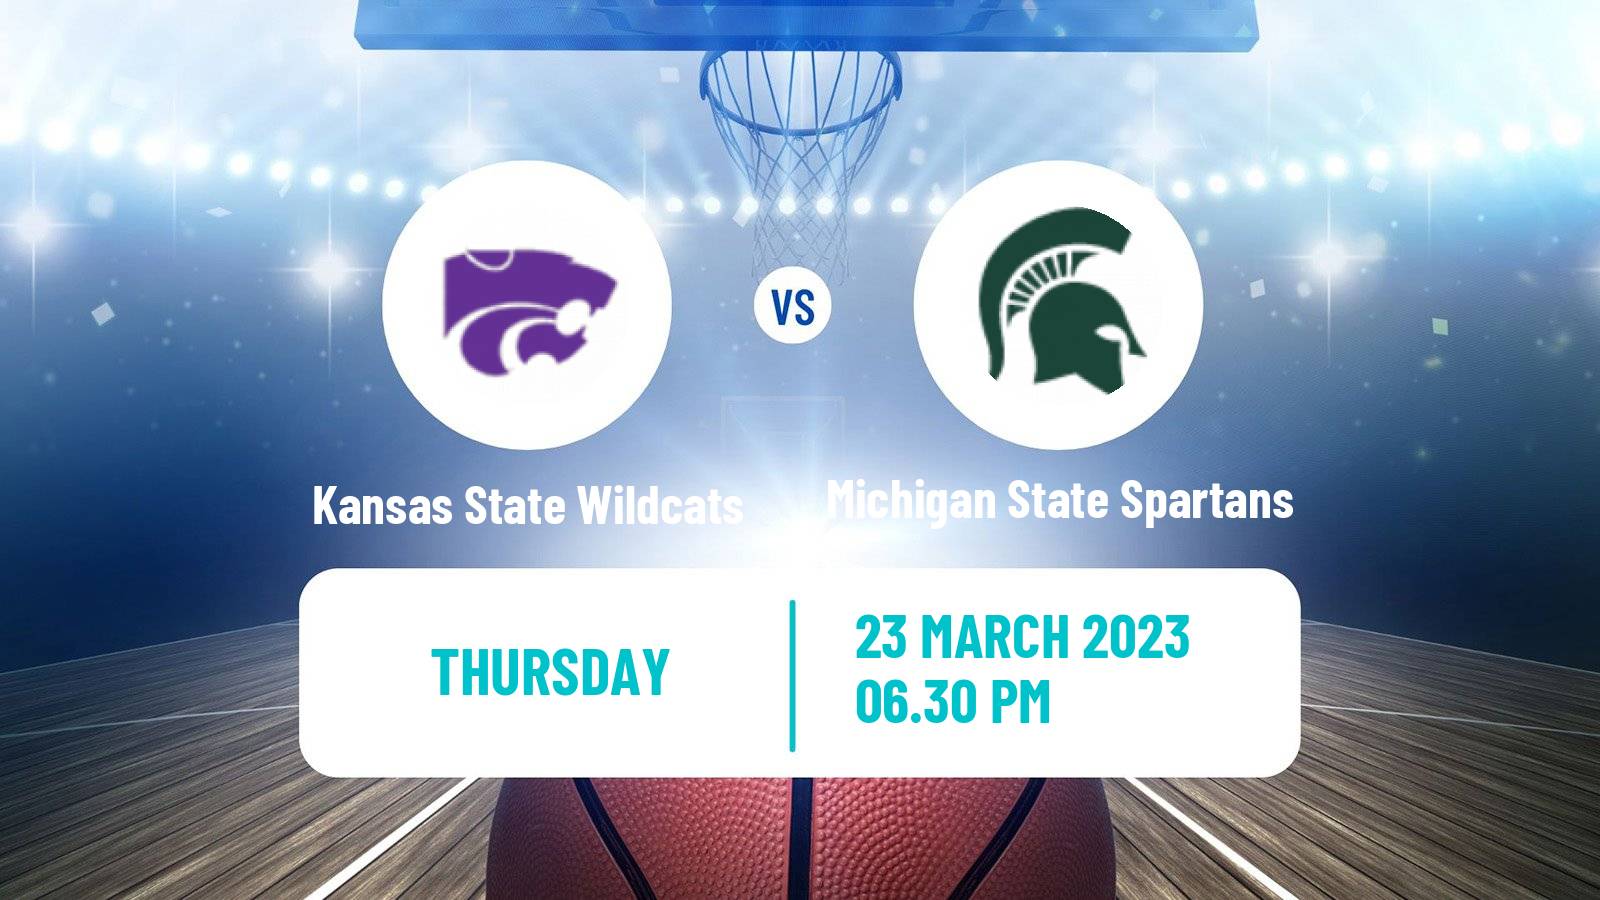 Basketball NCAA College Basketball Kansas State Wildcats - Michigan State Spartans